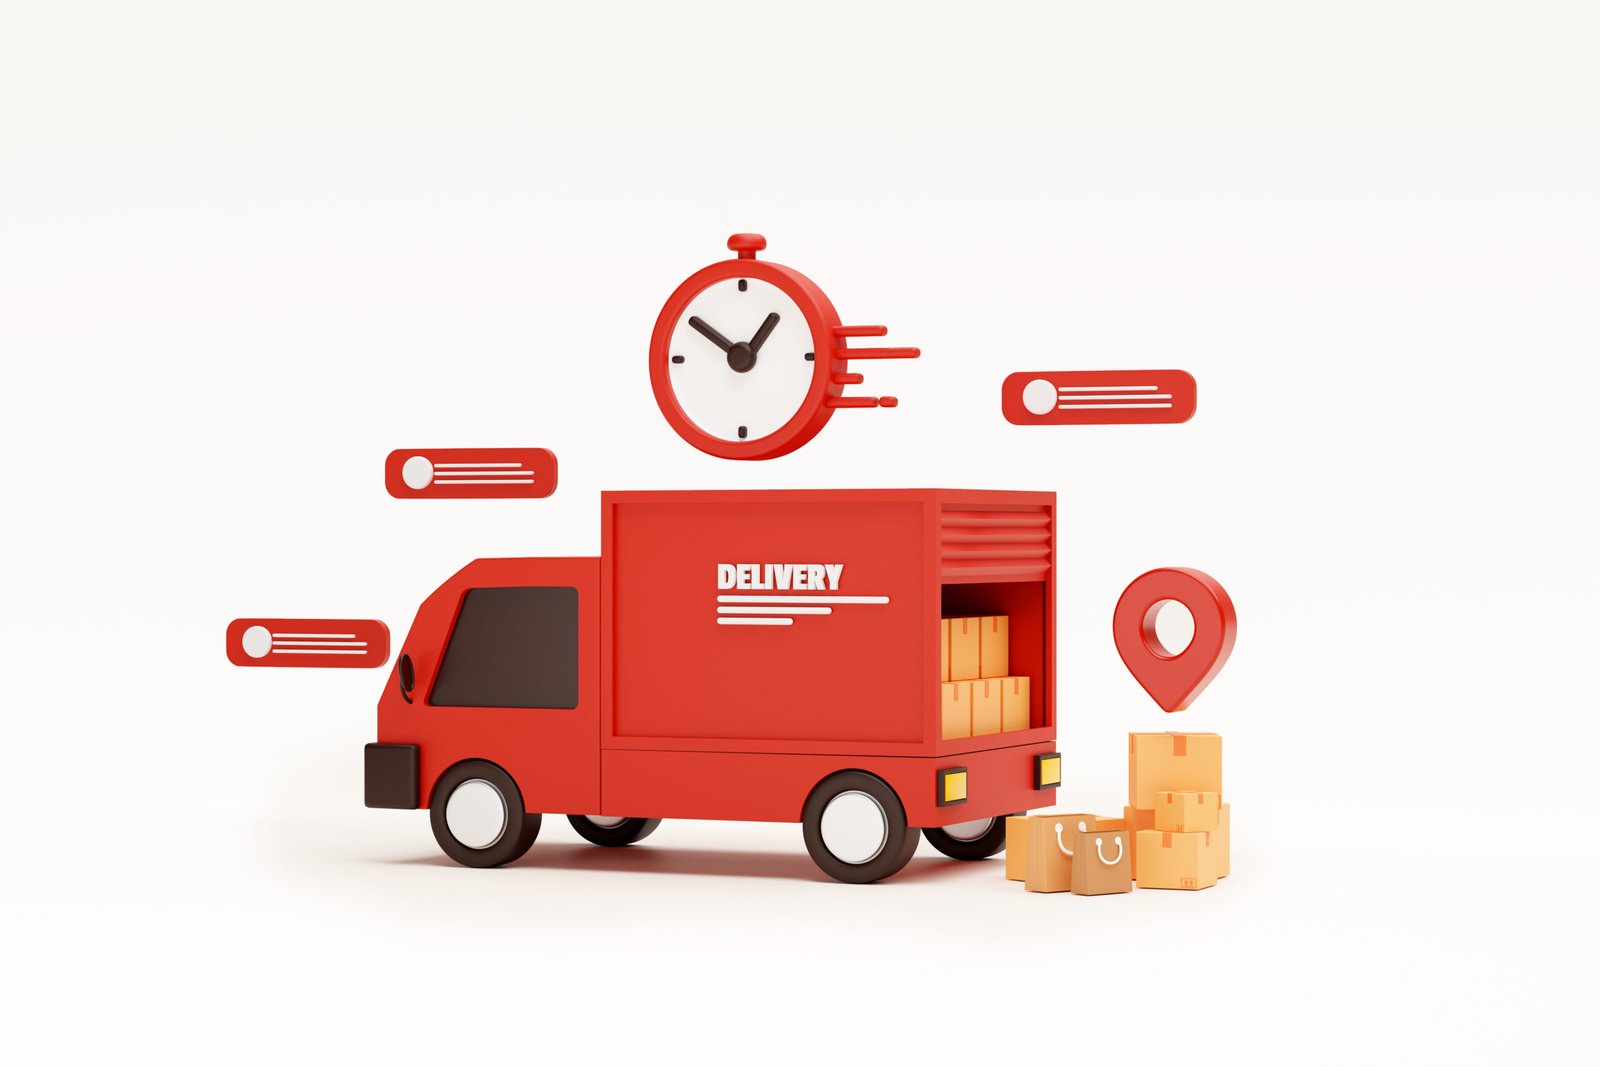 Red delivery car deliver express Shipping fast delivery truck and Pin pointer mark location and cardboard boxes with bubble chat message and clock delivery transportation logistics concept on white background 3d rendering illustration